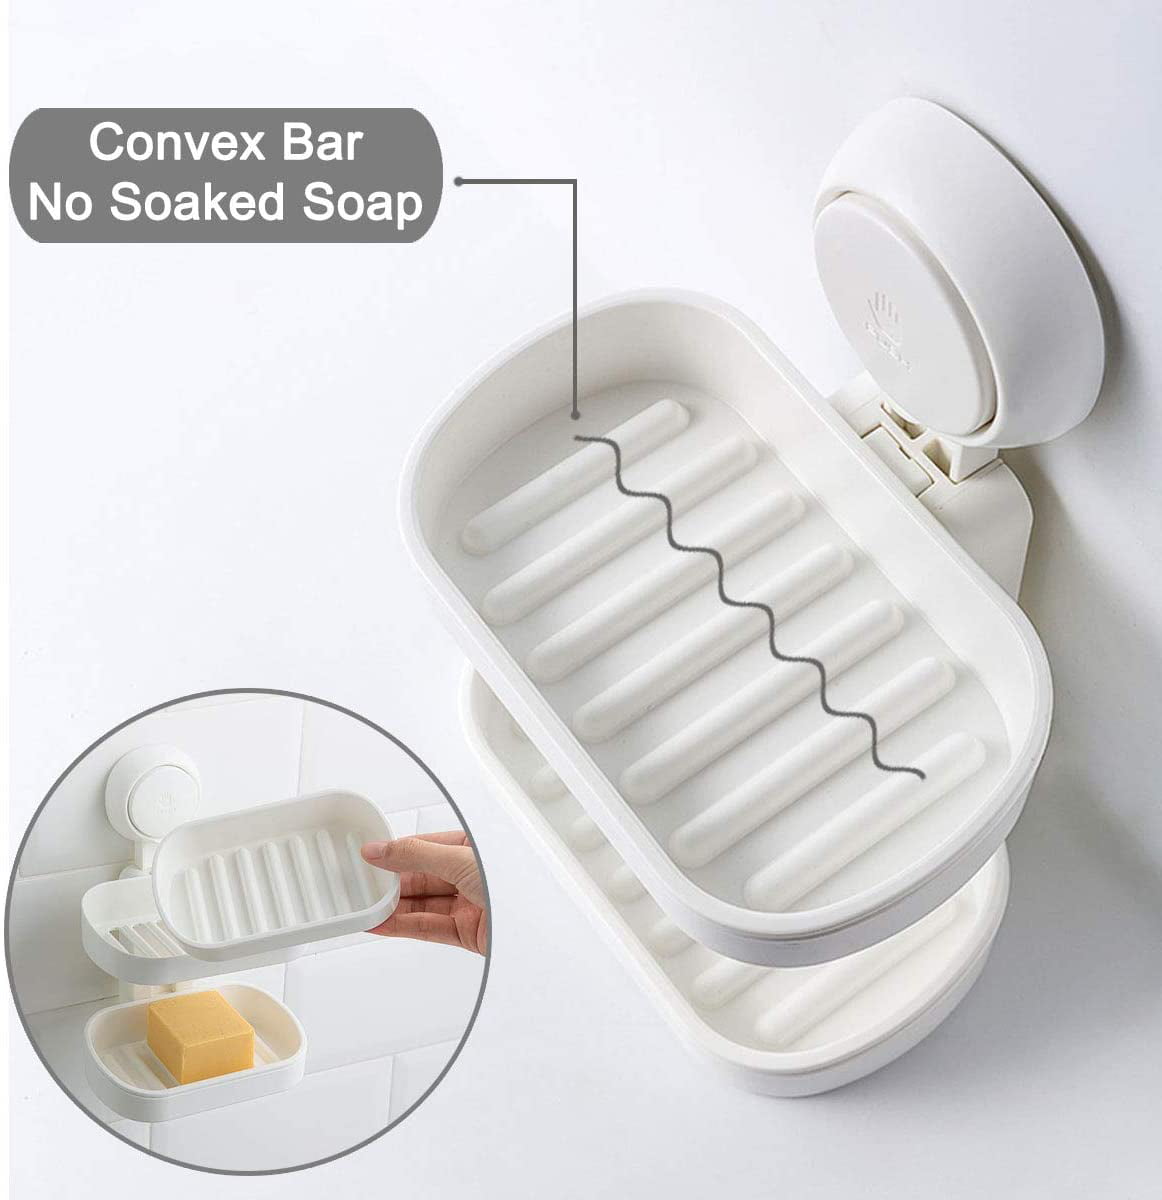 VELMADE Heavy Duty Soap Dish, No-Drilling Reusable Shampoo Bar Soap Holder, Wall Mounted Suction Cup Soap Saver Dish Holder for Shower Bathroom, Tub